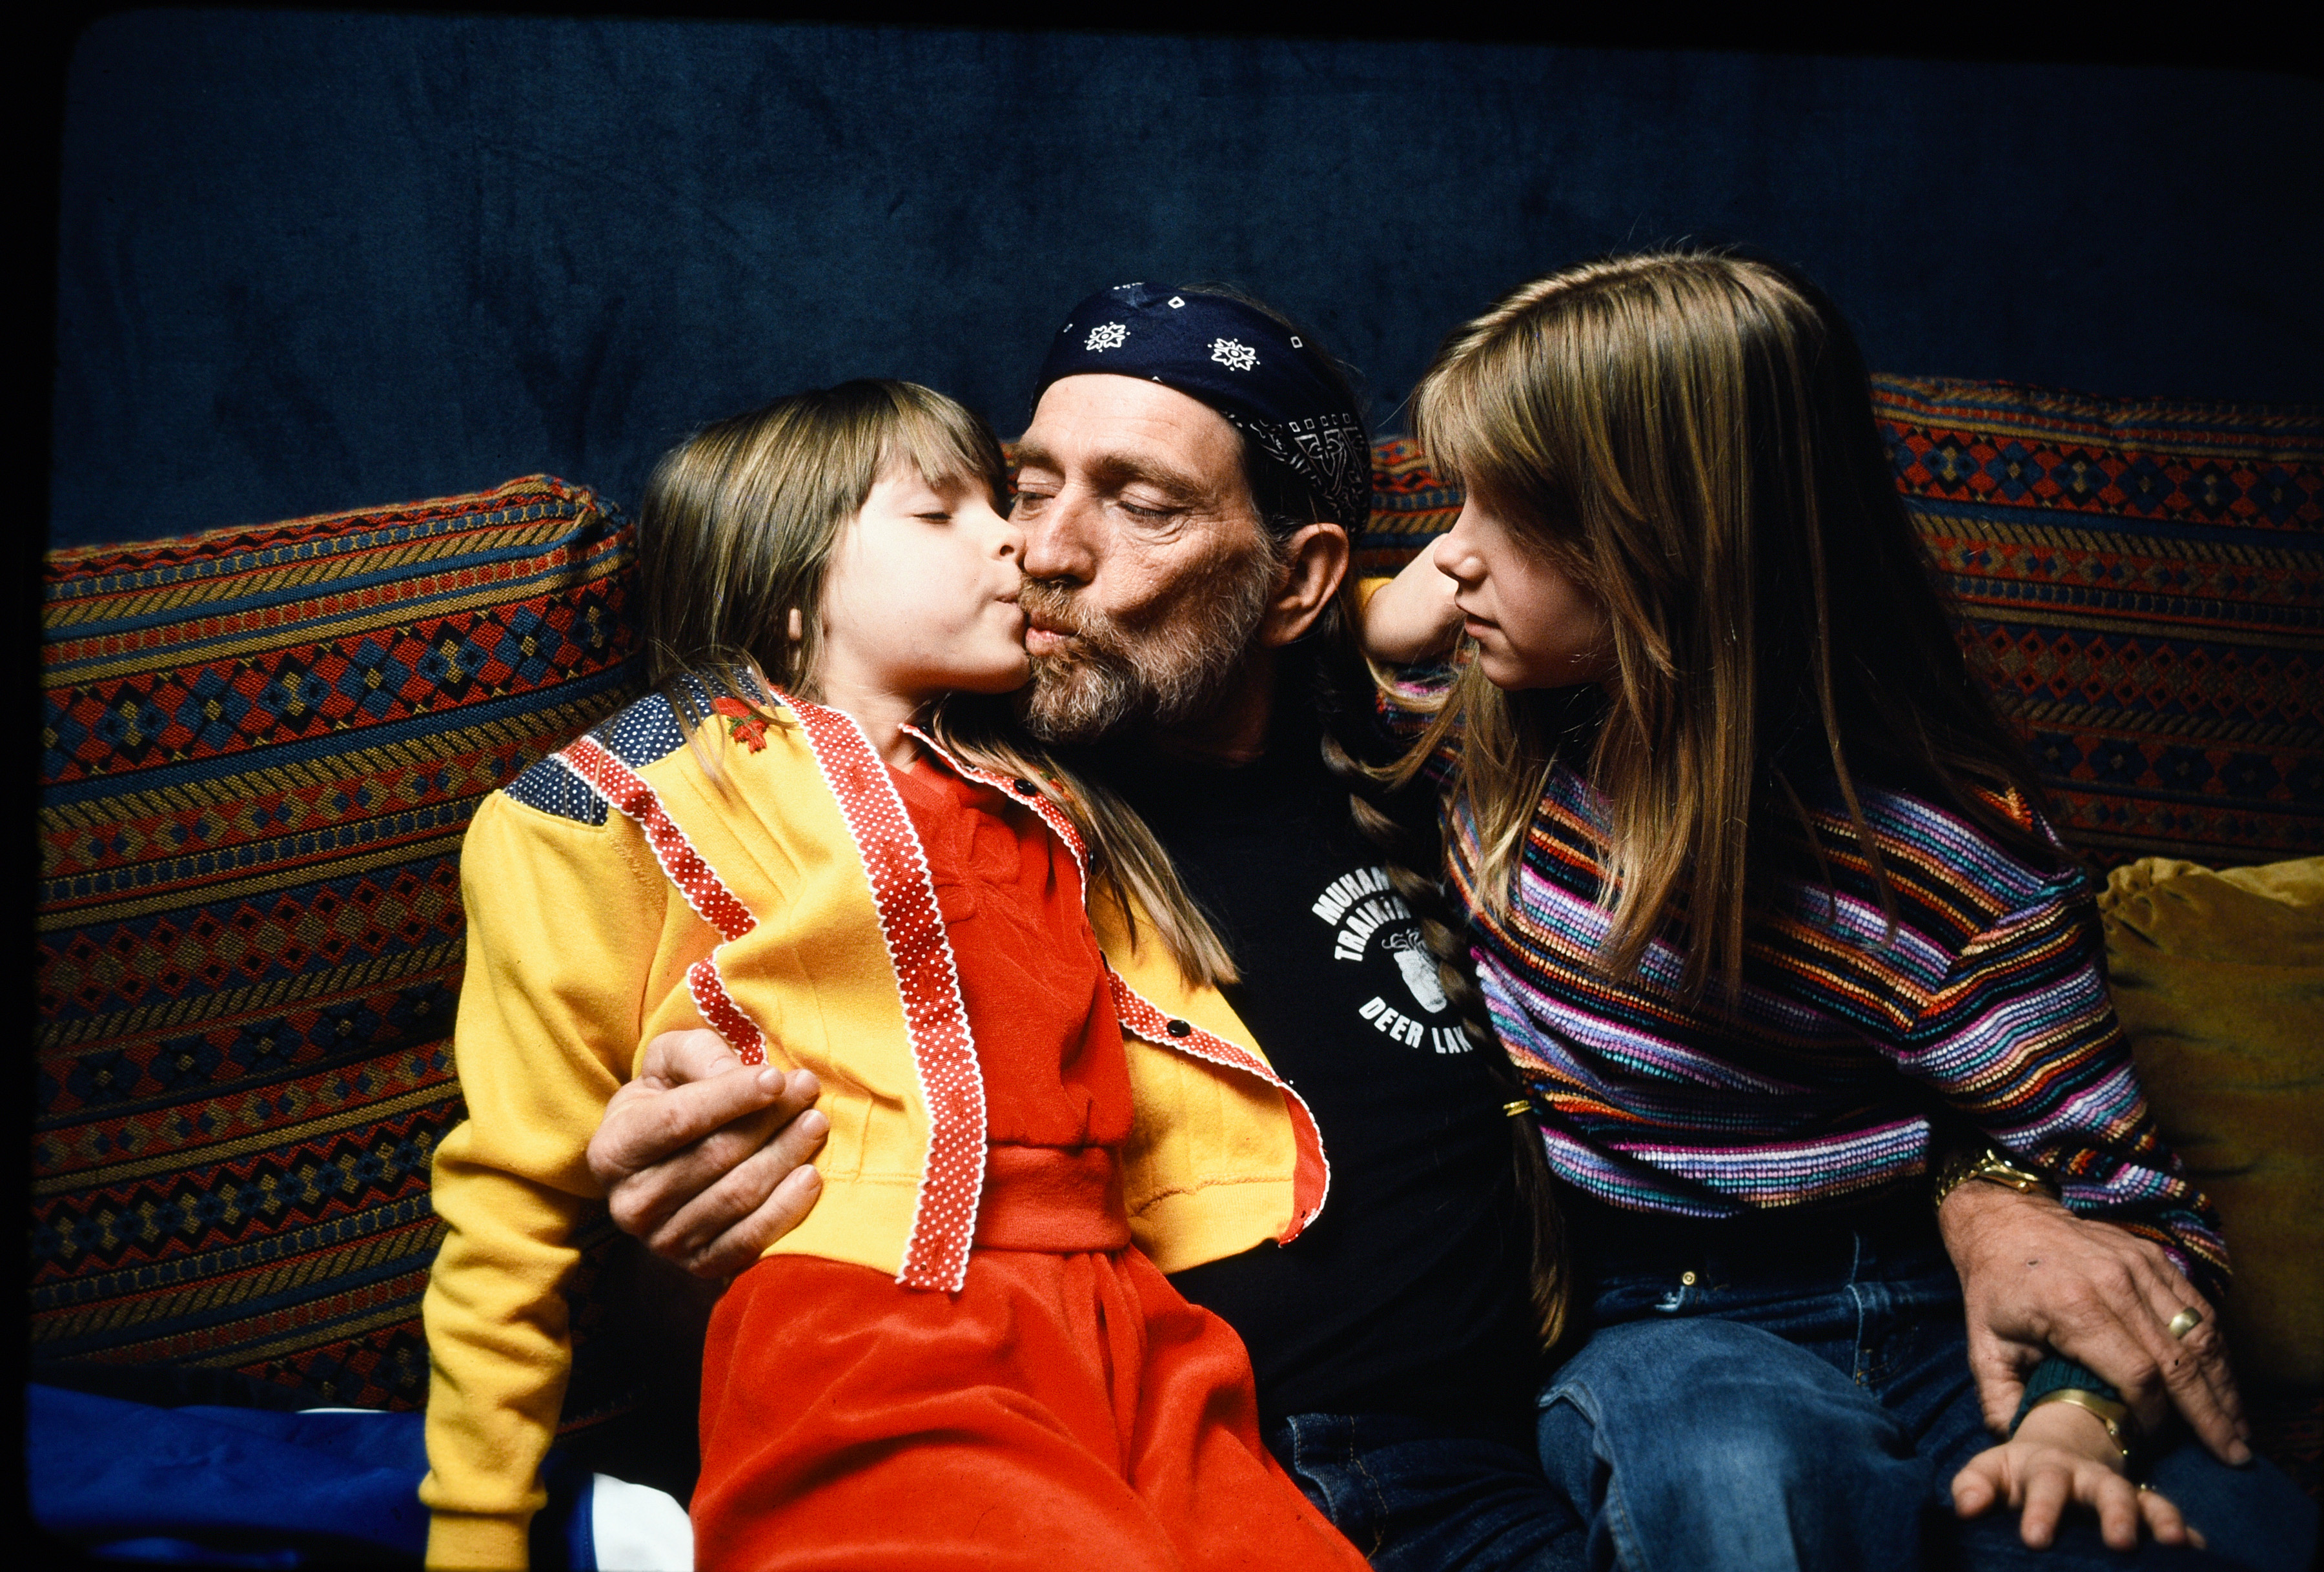 Willie Nelson with his daughters Paula Carlene and Amy Lee Willie Nelson with his third wife Connie Koepke on June 18, 1980 in Las Vegas, Nevada | Source: Getty Images